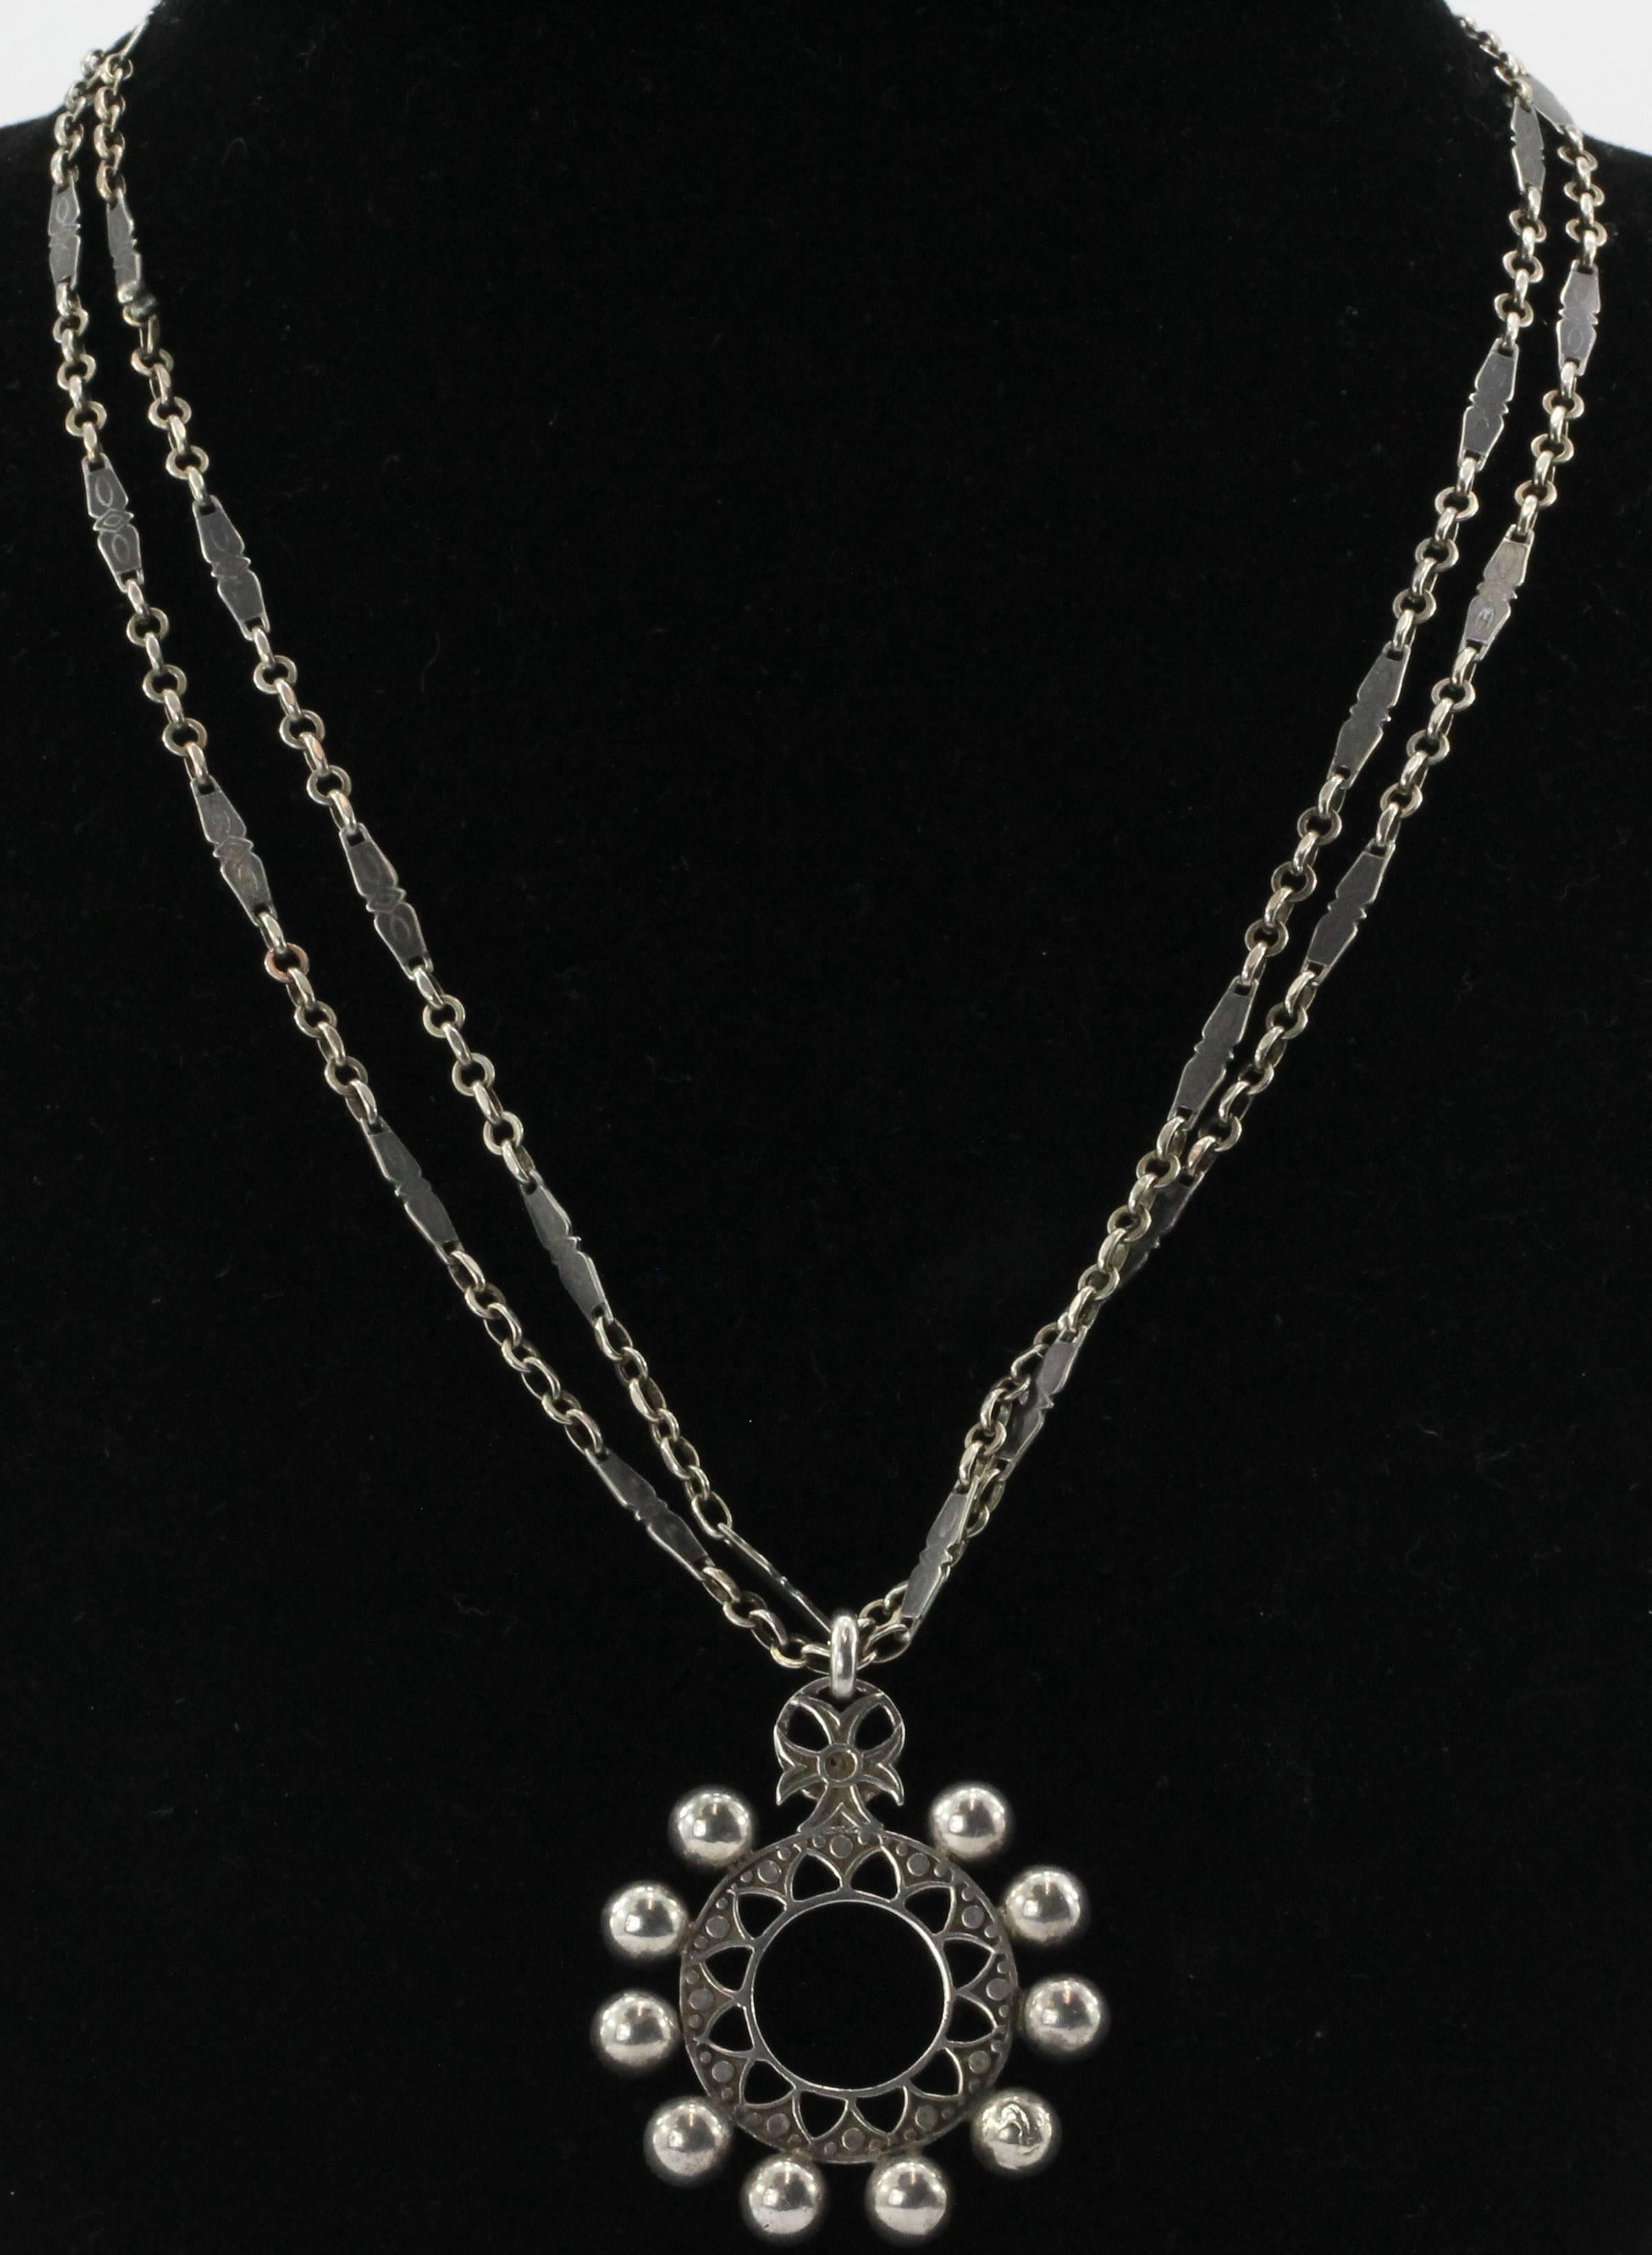 Antique French Gothic Arts & Crafts 800 Silver Necklace Circa 1880's. The piece is in excellent estate condition and ready to wear. The necklace is marked 800 and the back of the pendant is signed with a French makers mark CP with a cross between